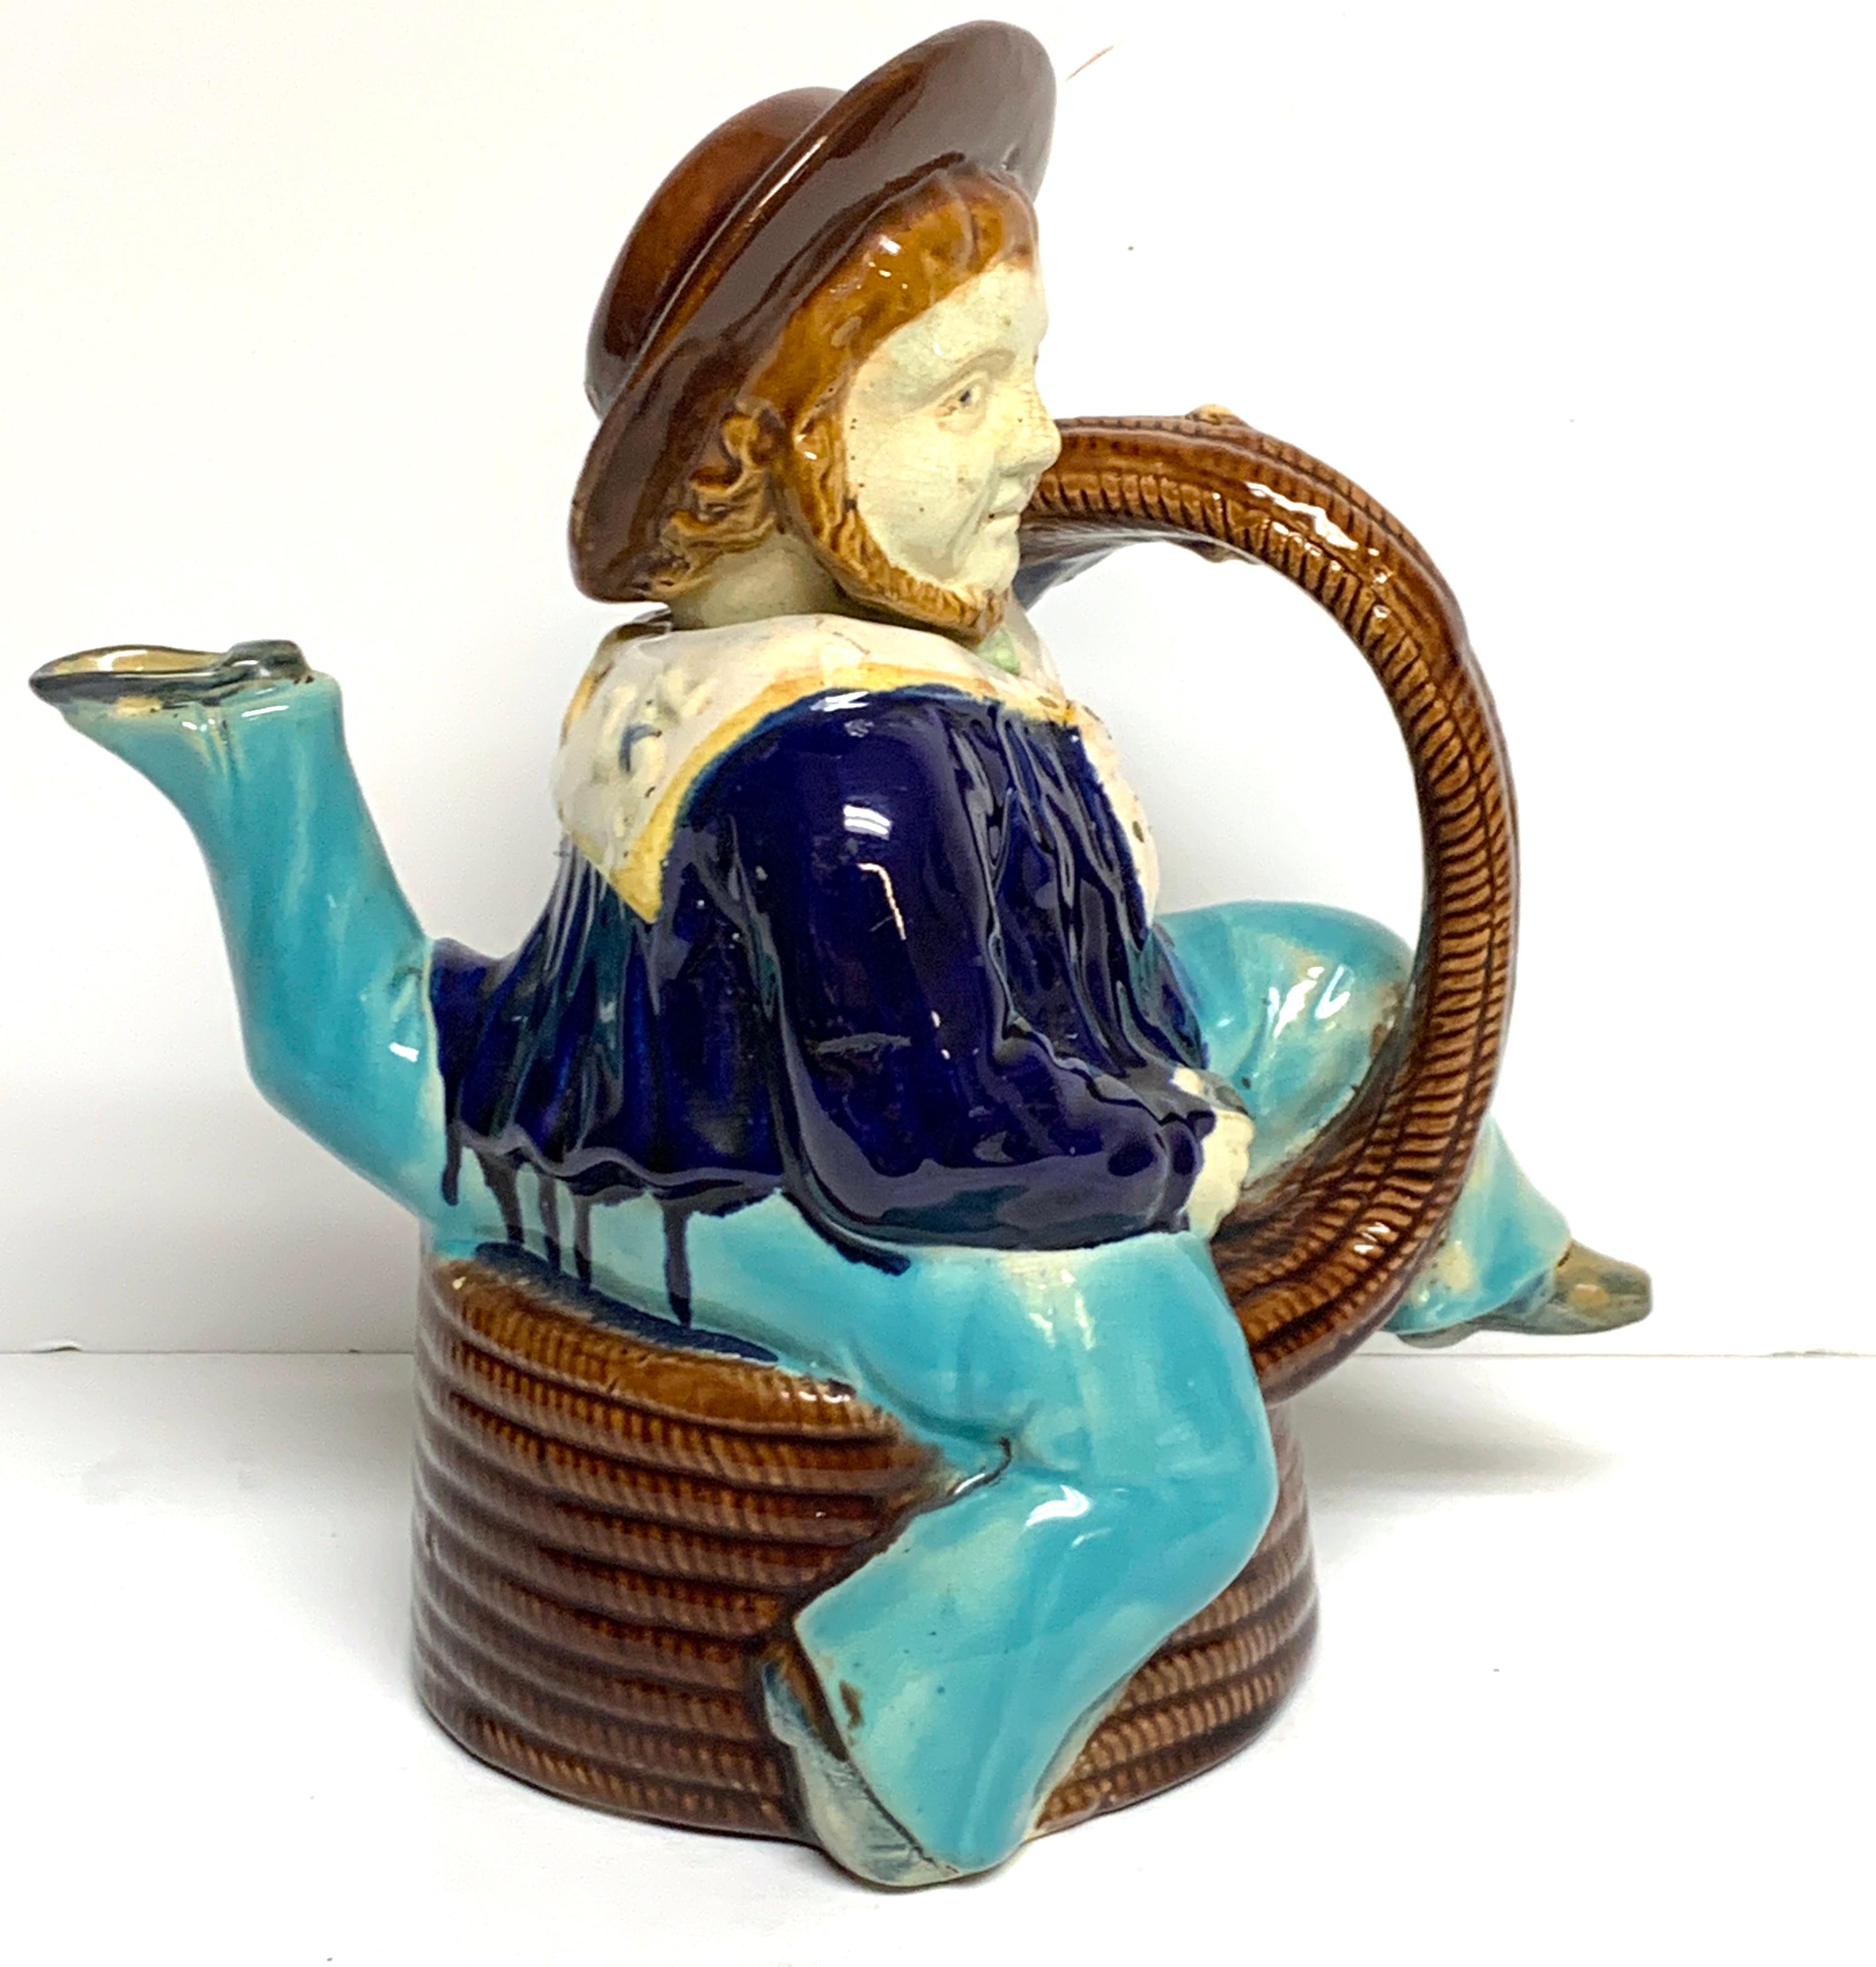 The Isle of Man Majolica 'Manx Sailor' Teapot, by William Brownfield & Sons
A special commission by the W. Broughton China rooms on Duke Street in Douglas, Isle of Man, circa 1875-1890. Modelled as a three legged Manx sailor in uniform, sitting on